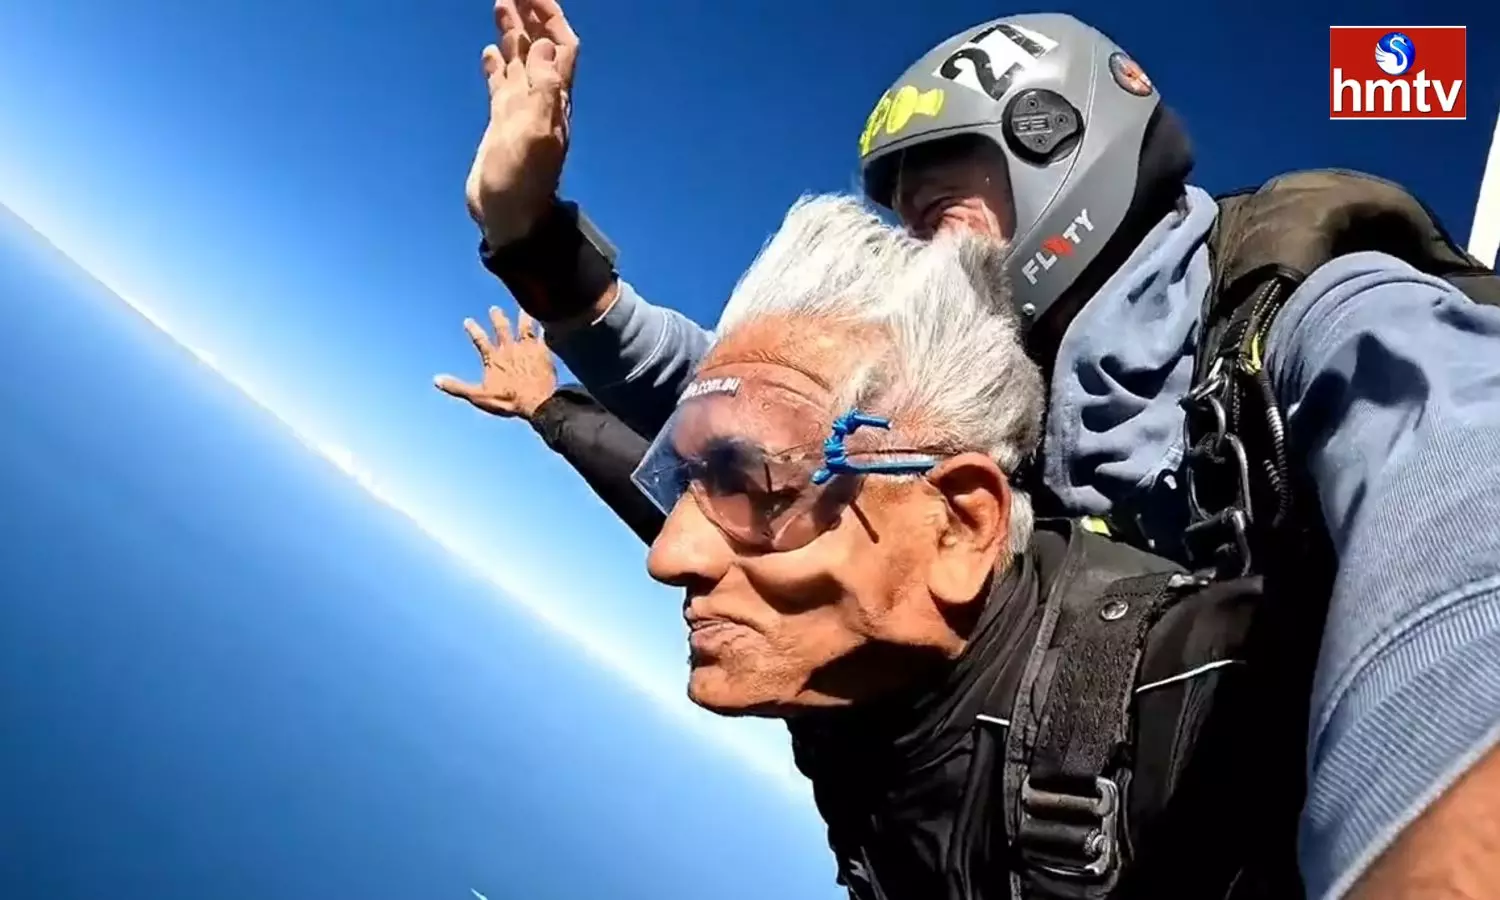 70-year-old Chhattisgarh Minister TS Singh Deo goes skydiving in Australia